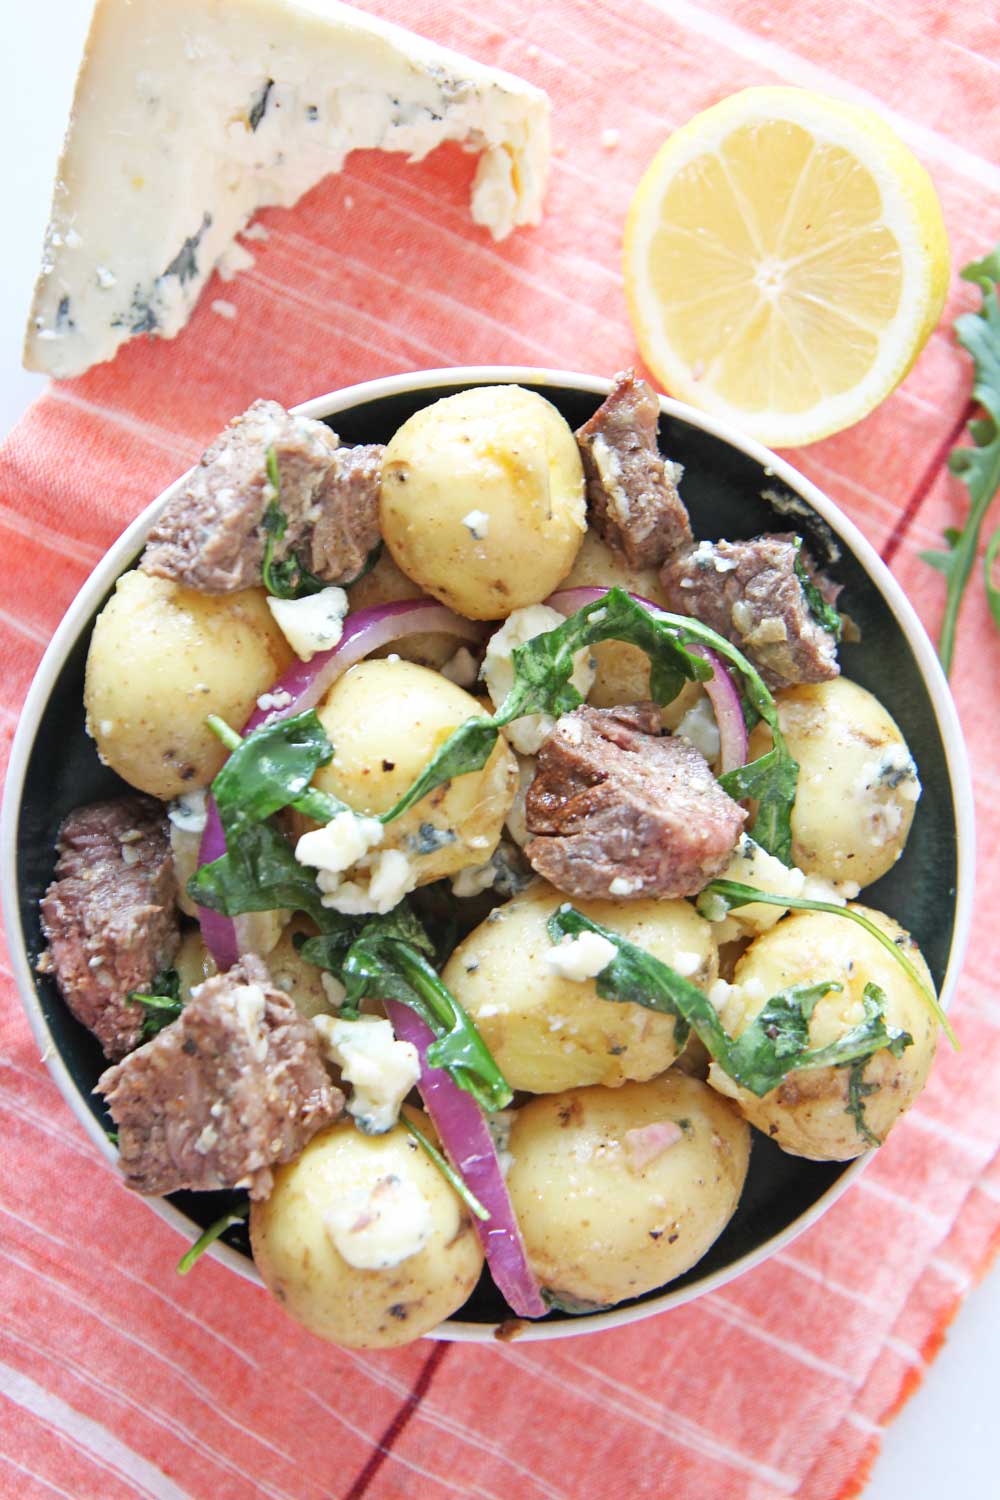 Steakhouse Steak and Potato Salad. This is a 20 minute recipe for busy weeknightt dinner. NY strip steak and Yukon gold potatoes mix with blue cheese and peppery arugula! Perfect next day leftovers. #potatosalad #perfectsteak